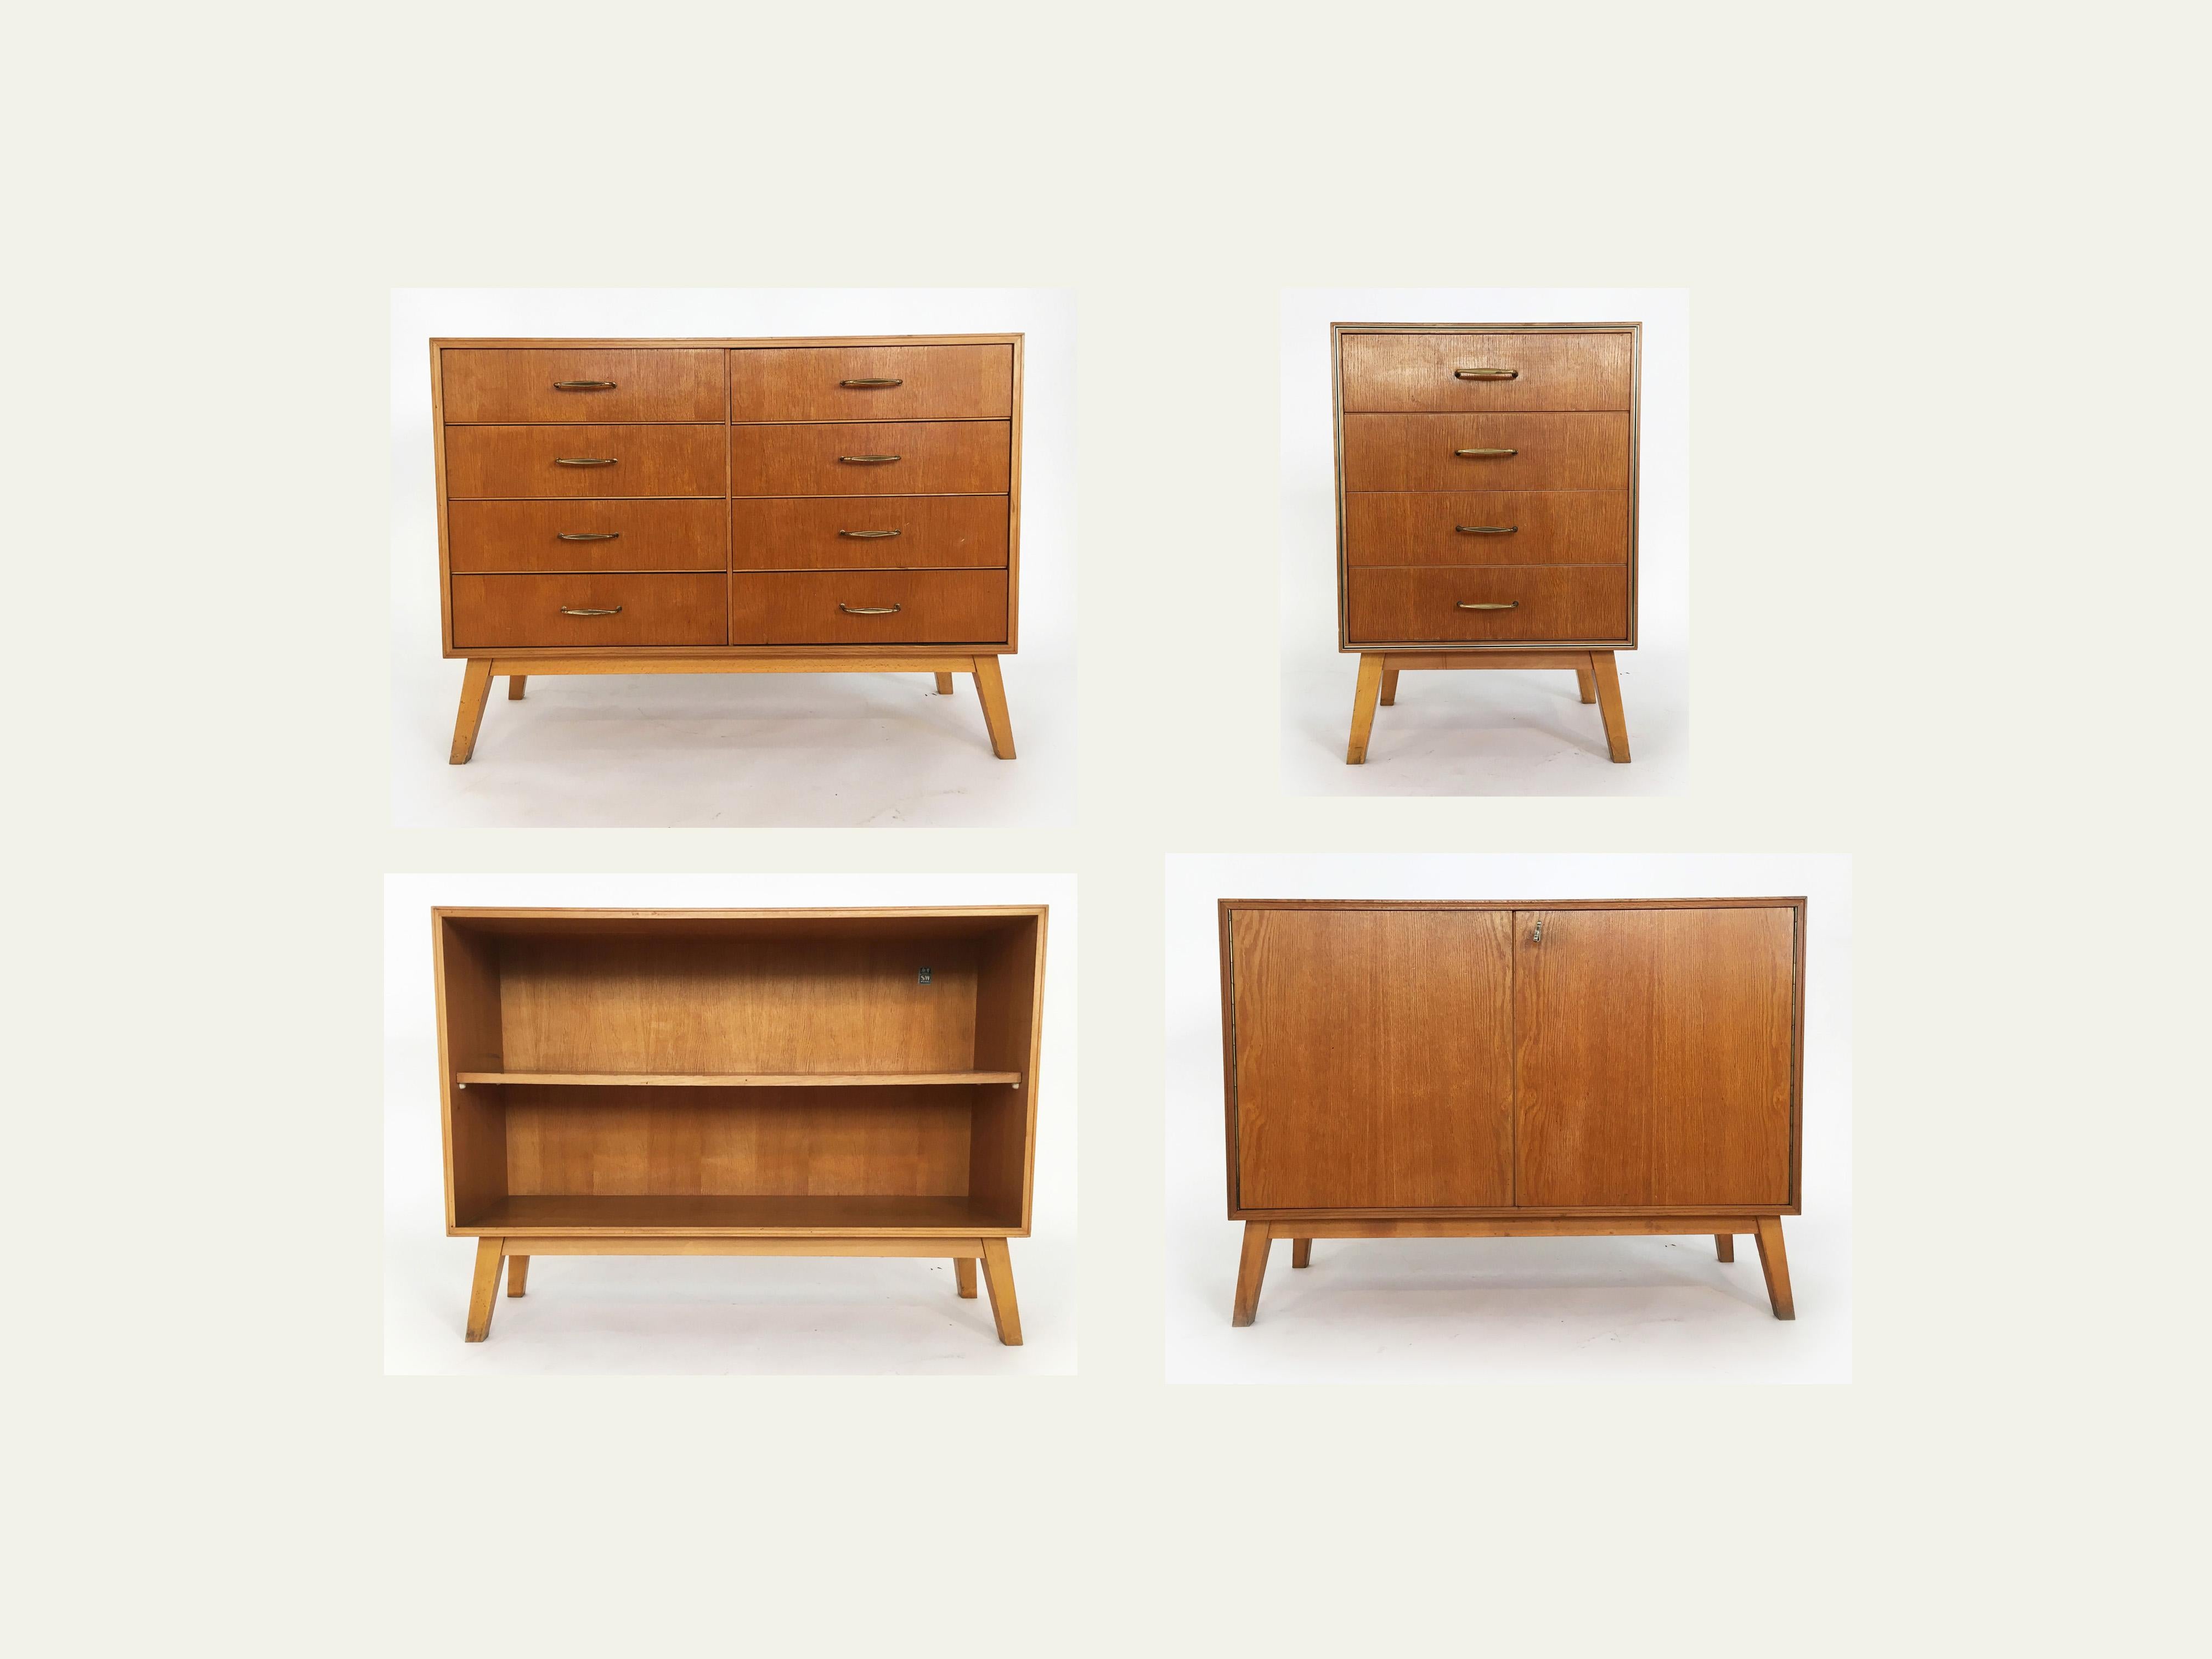 SW Möbel sideboard, chest of drawers, bookcase collection, Vienna, 1950s. SW Möbel (Soziale Wohnkultur) was a furniture brand of the 1950s, created to provide modern functional furniture at affordable prices for small apartment in Vienna Austria.